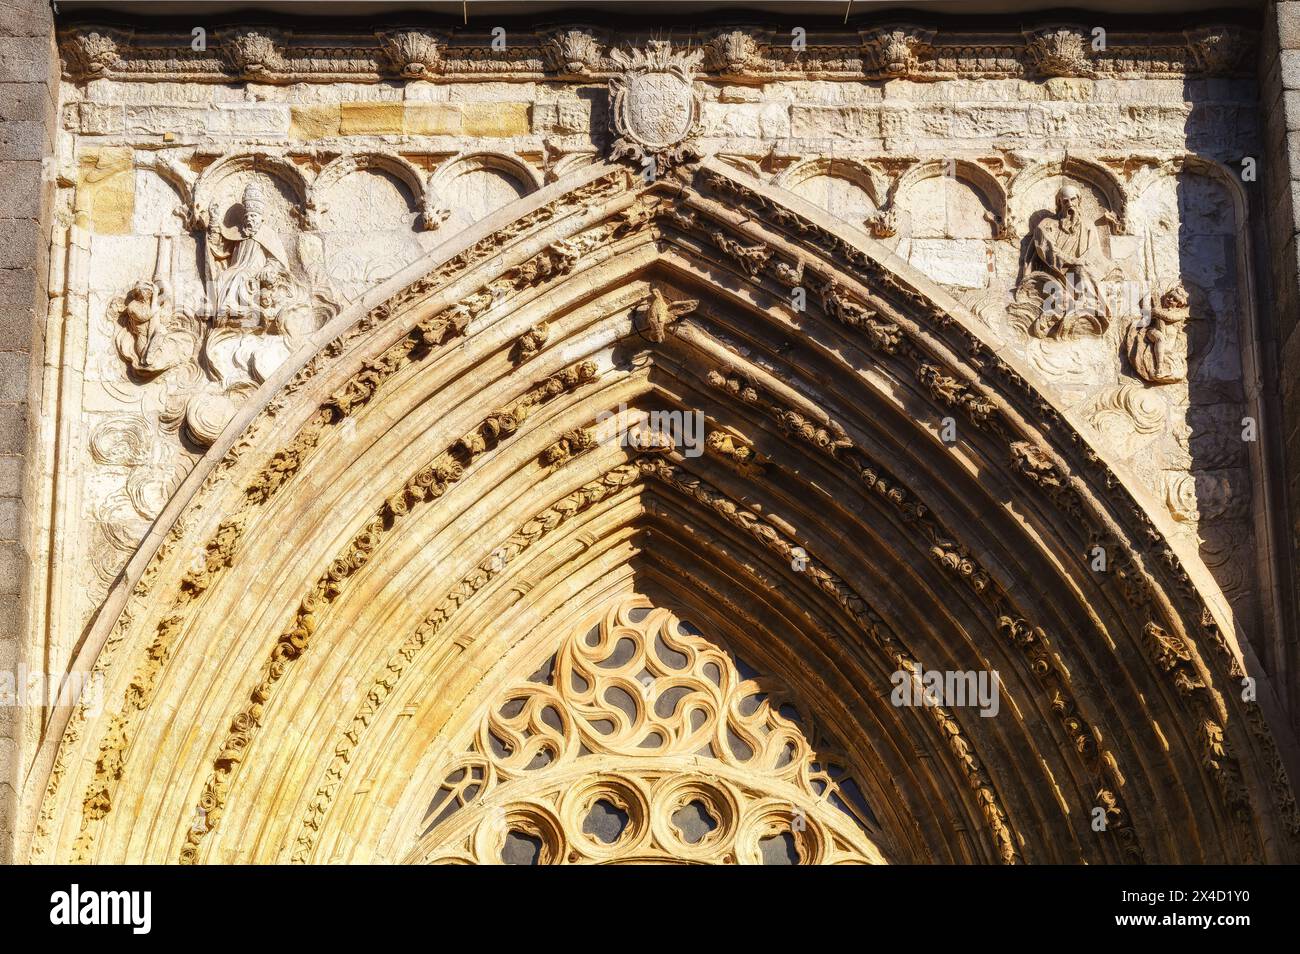 Architectural features in the Avila Cathedral, Spain. Toned or slightly enhanced image. Stock Photo